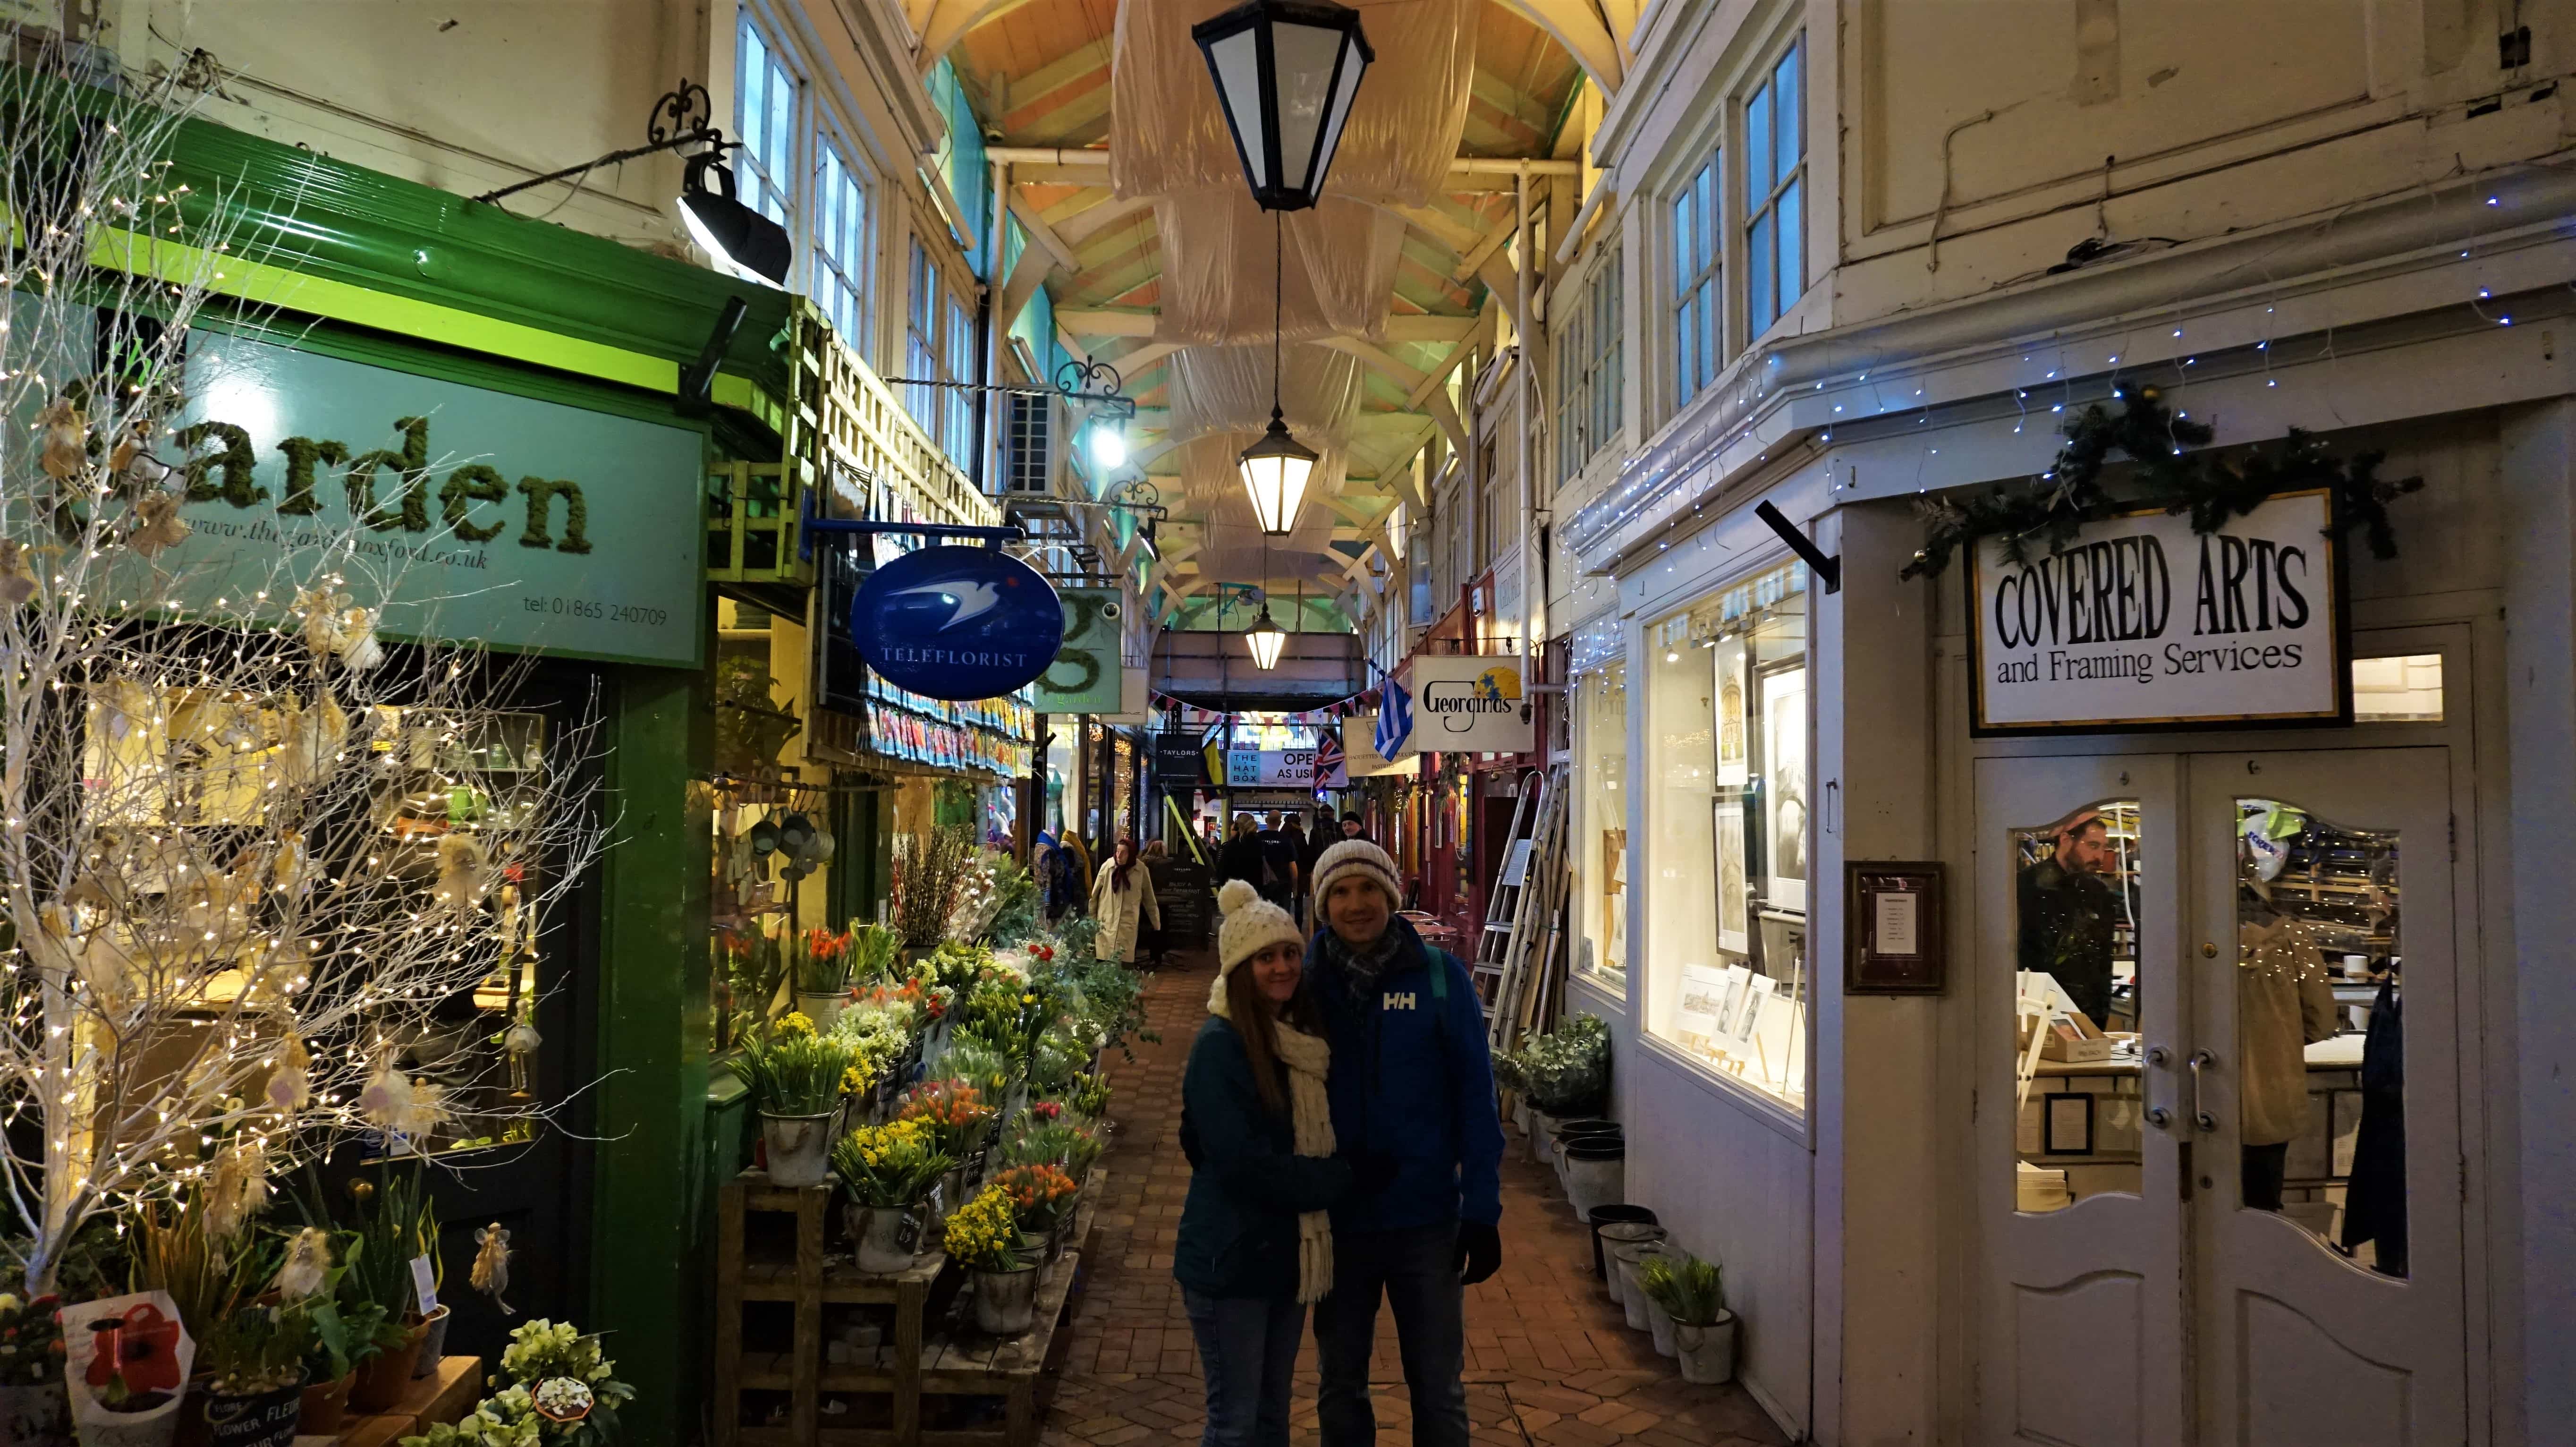 Us in the covered market on an Oxford City break